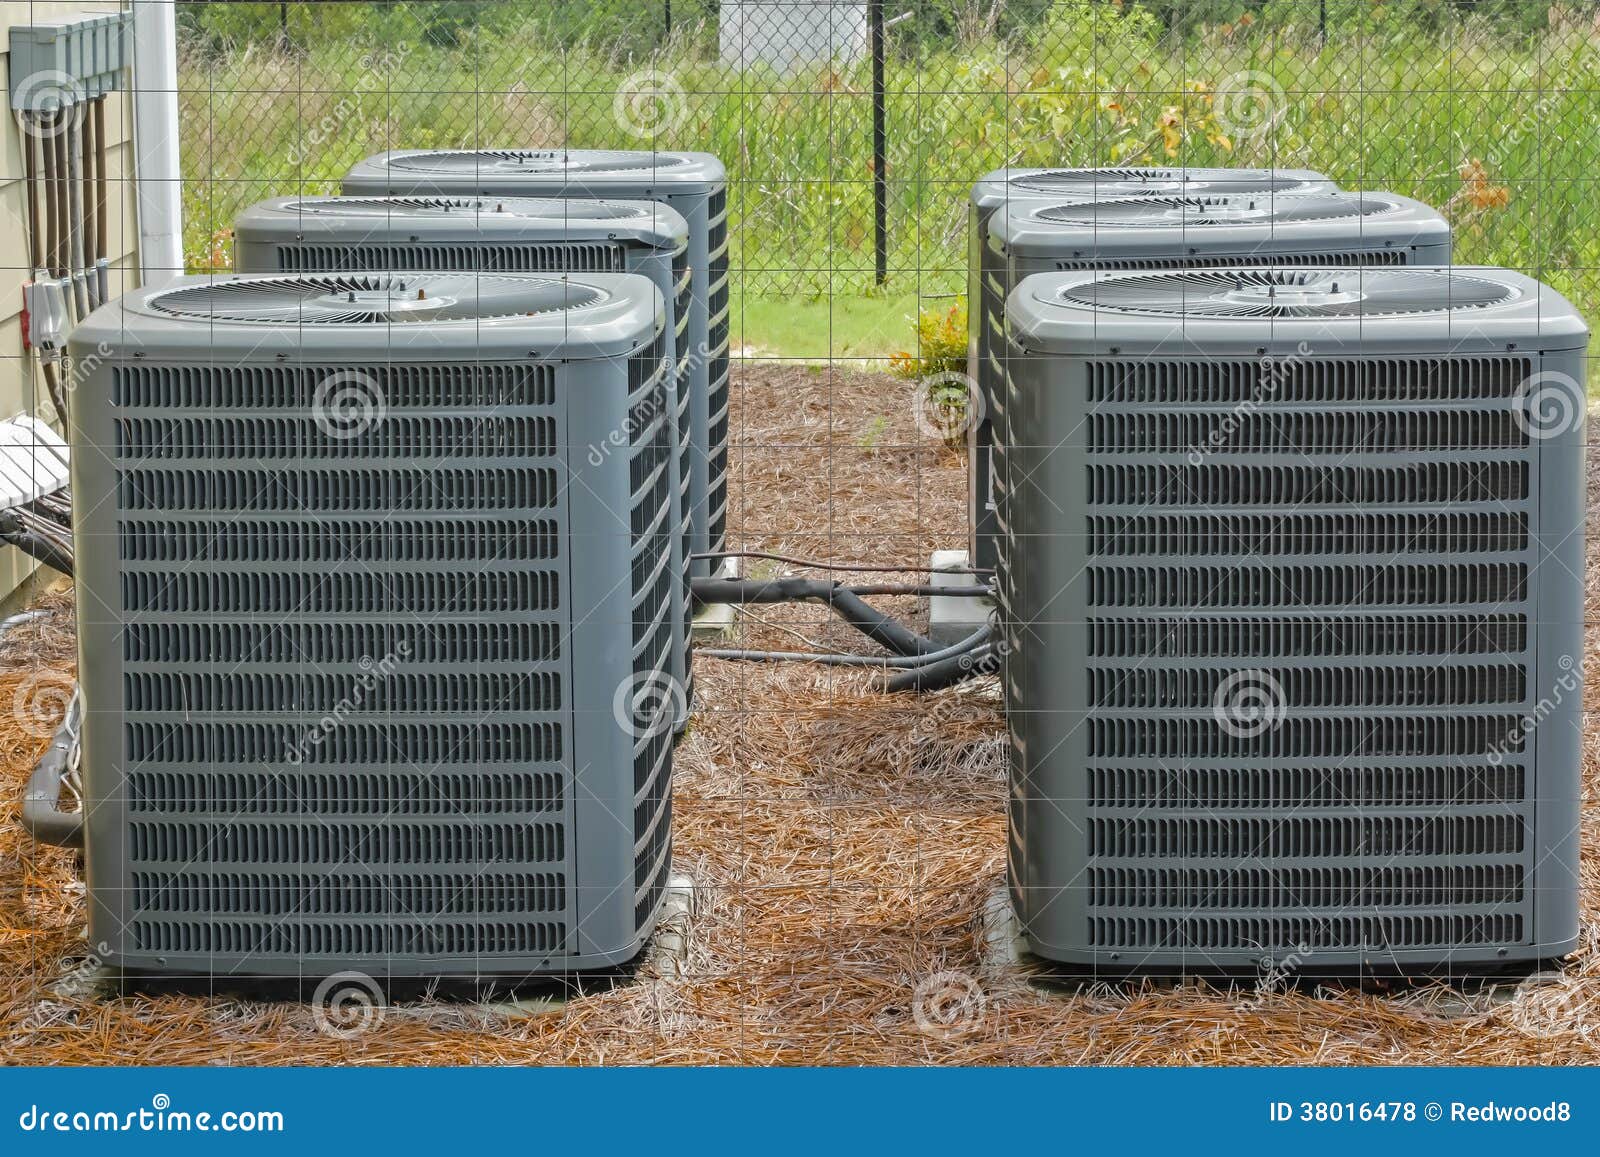 group of air conditioning units